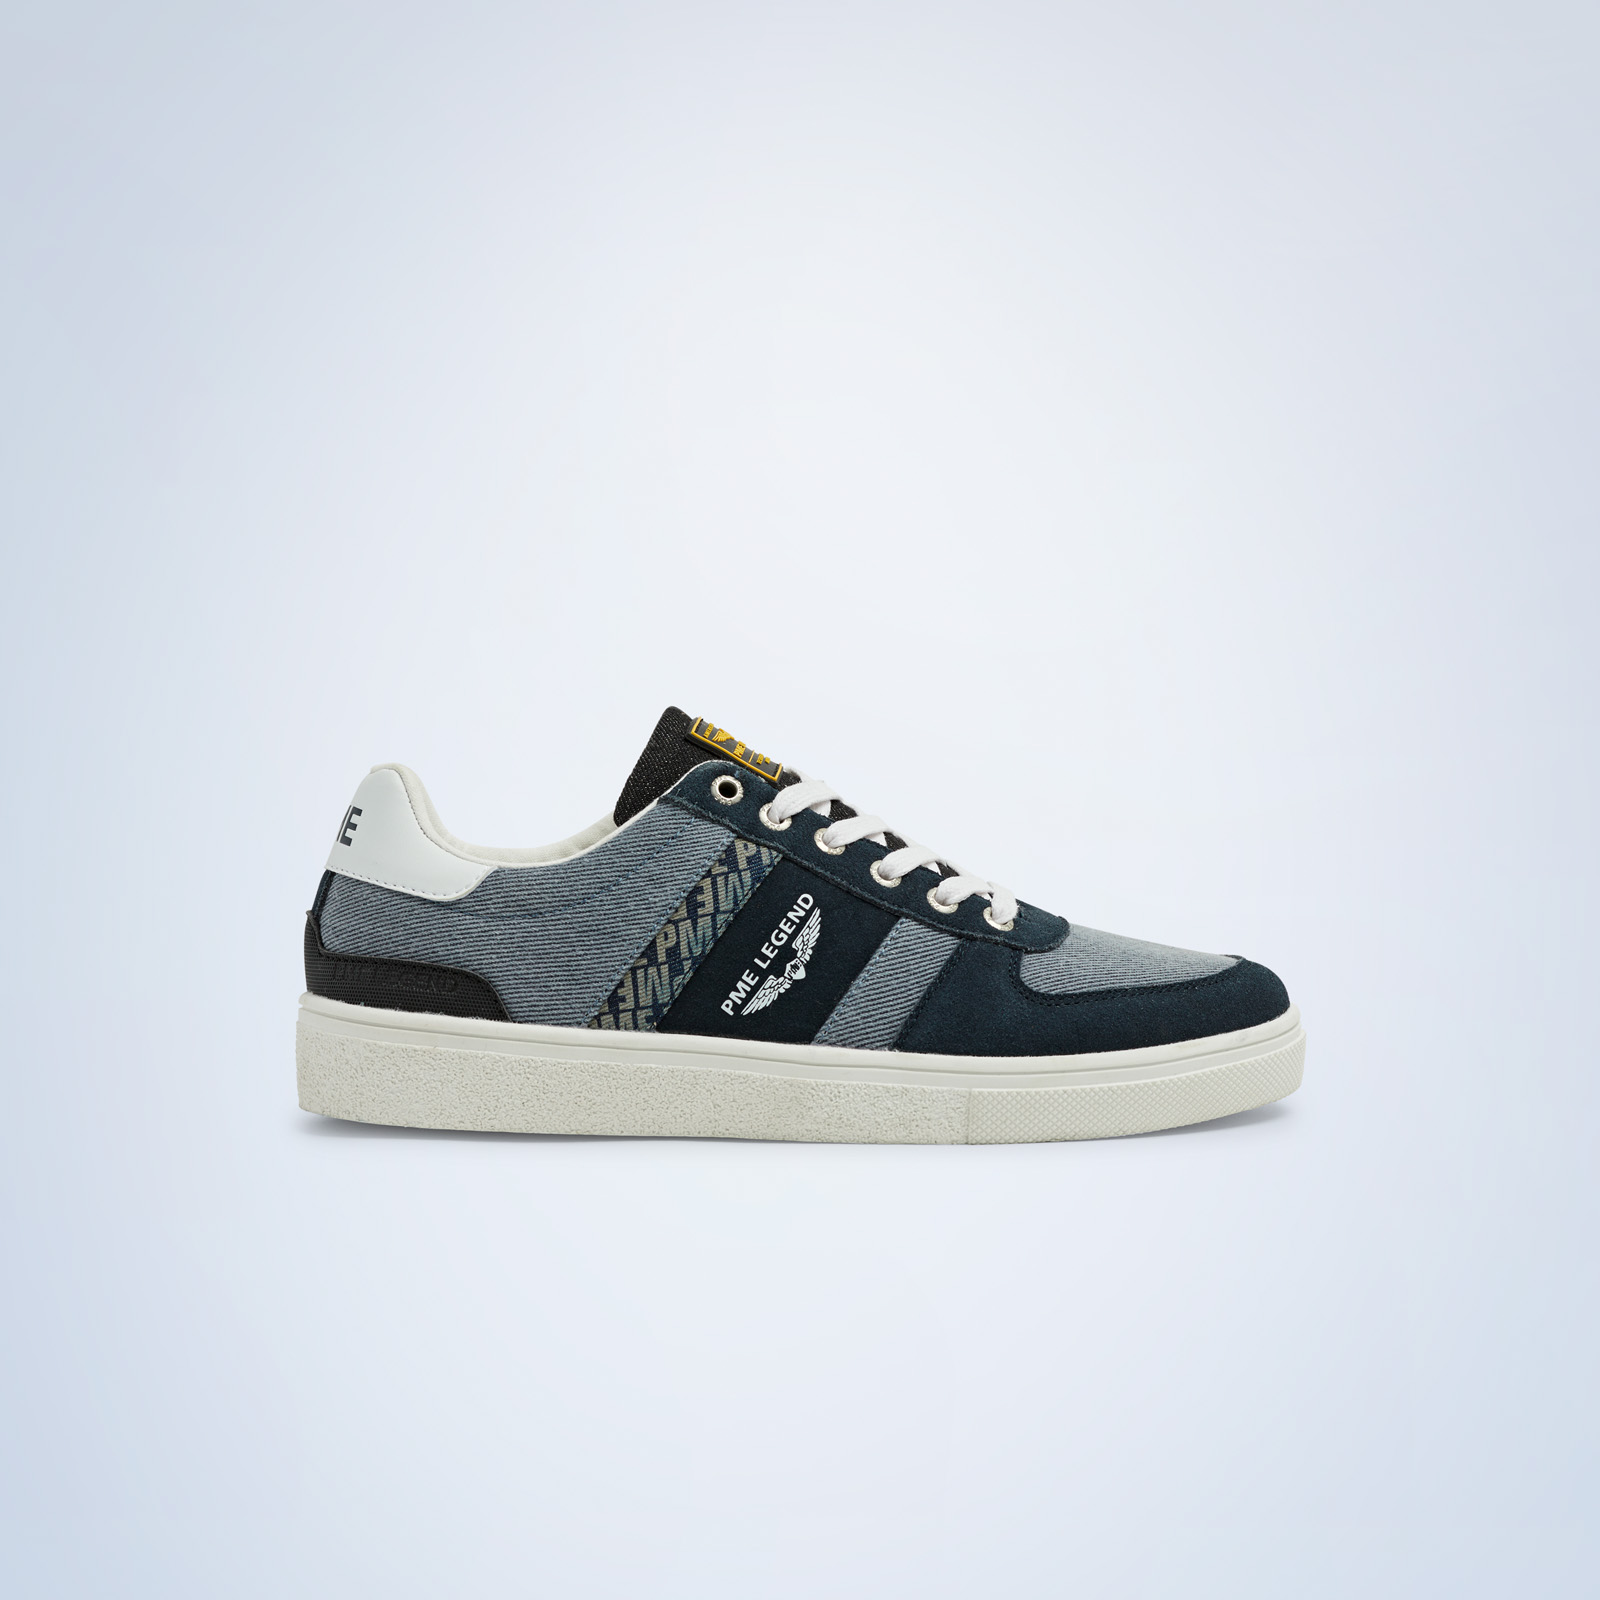 Vrijlating Woord tuin PME LEGEND | Skytank Sneaker | Free shipping and returns